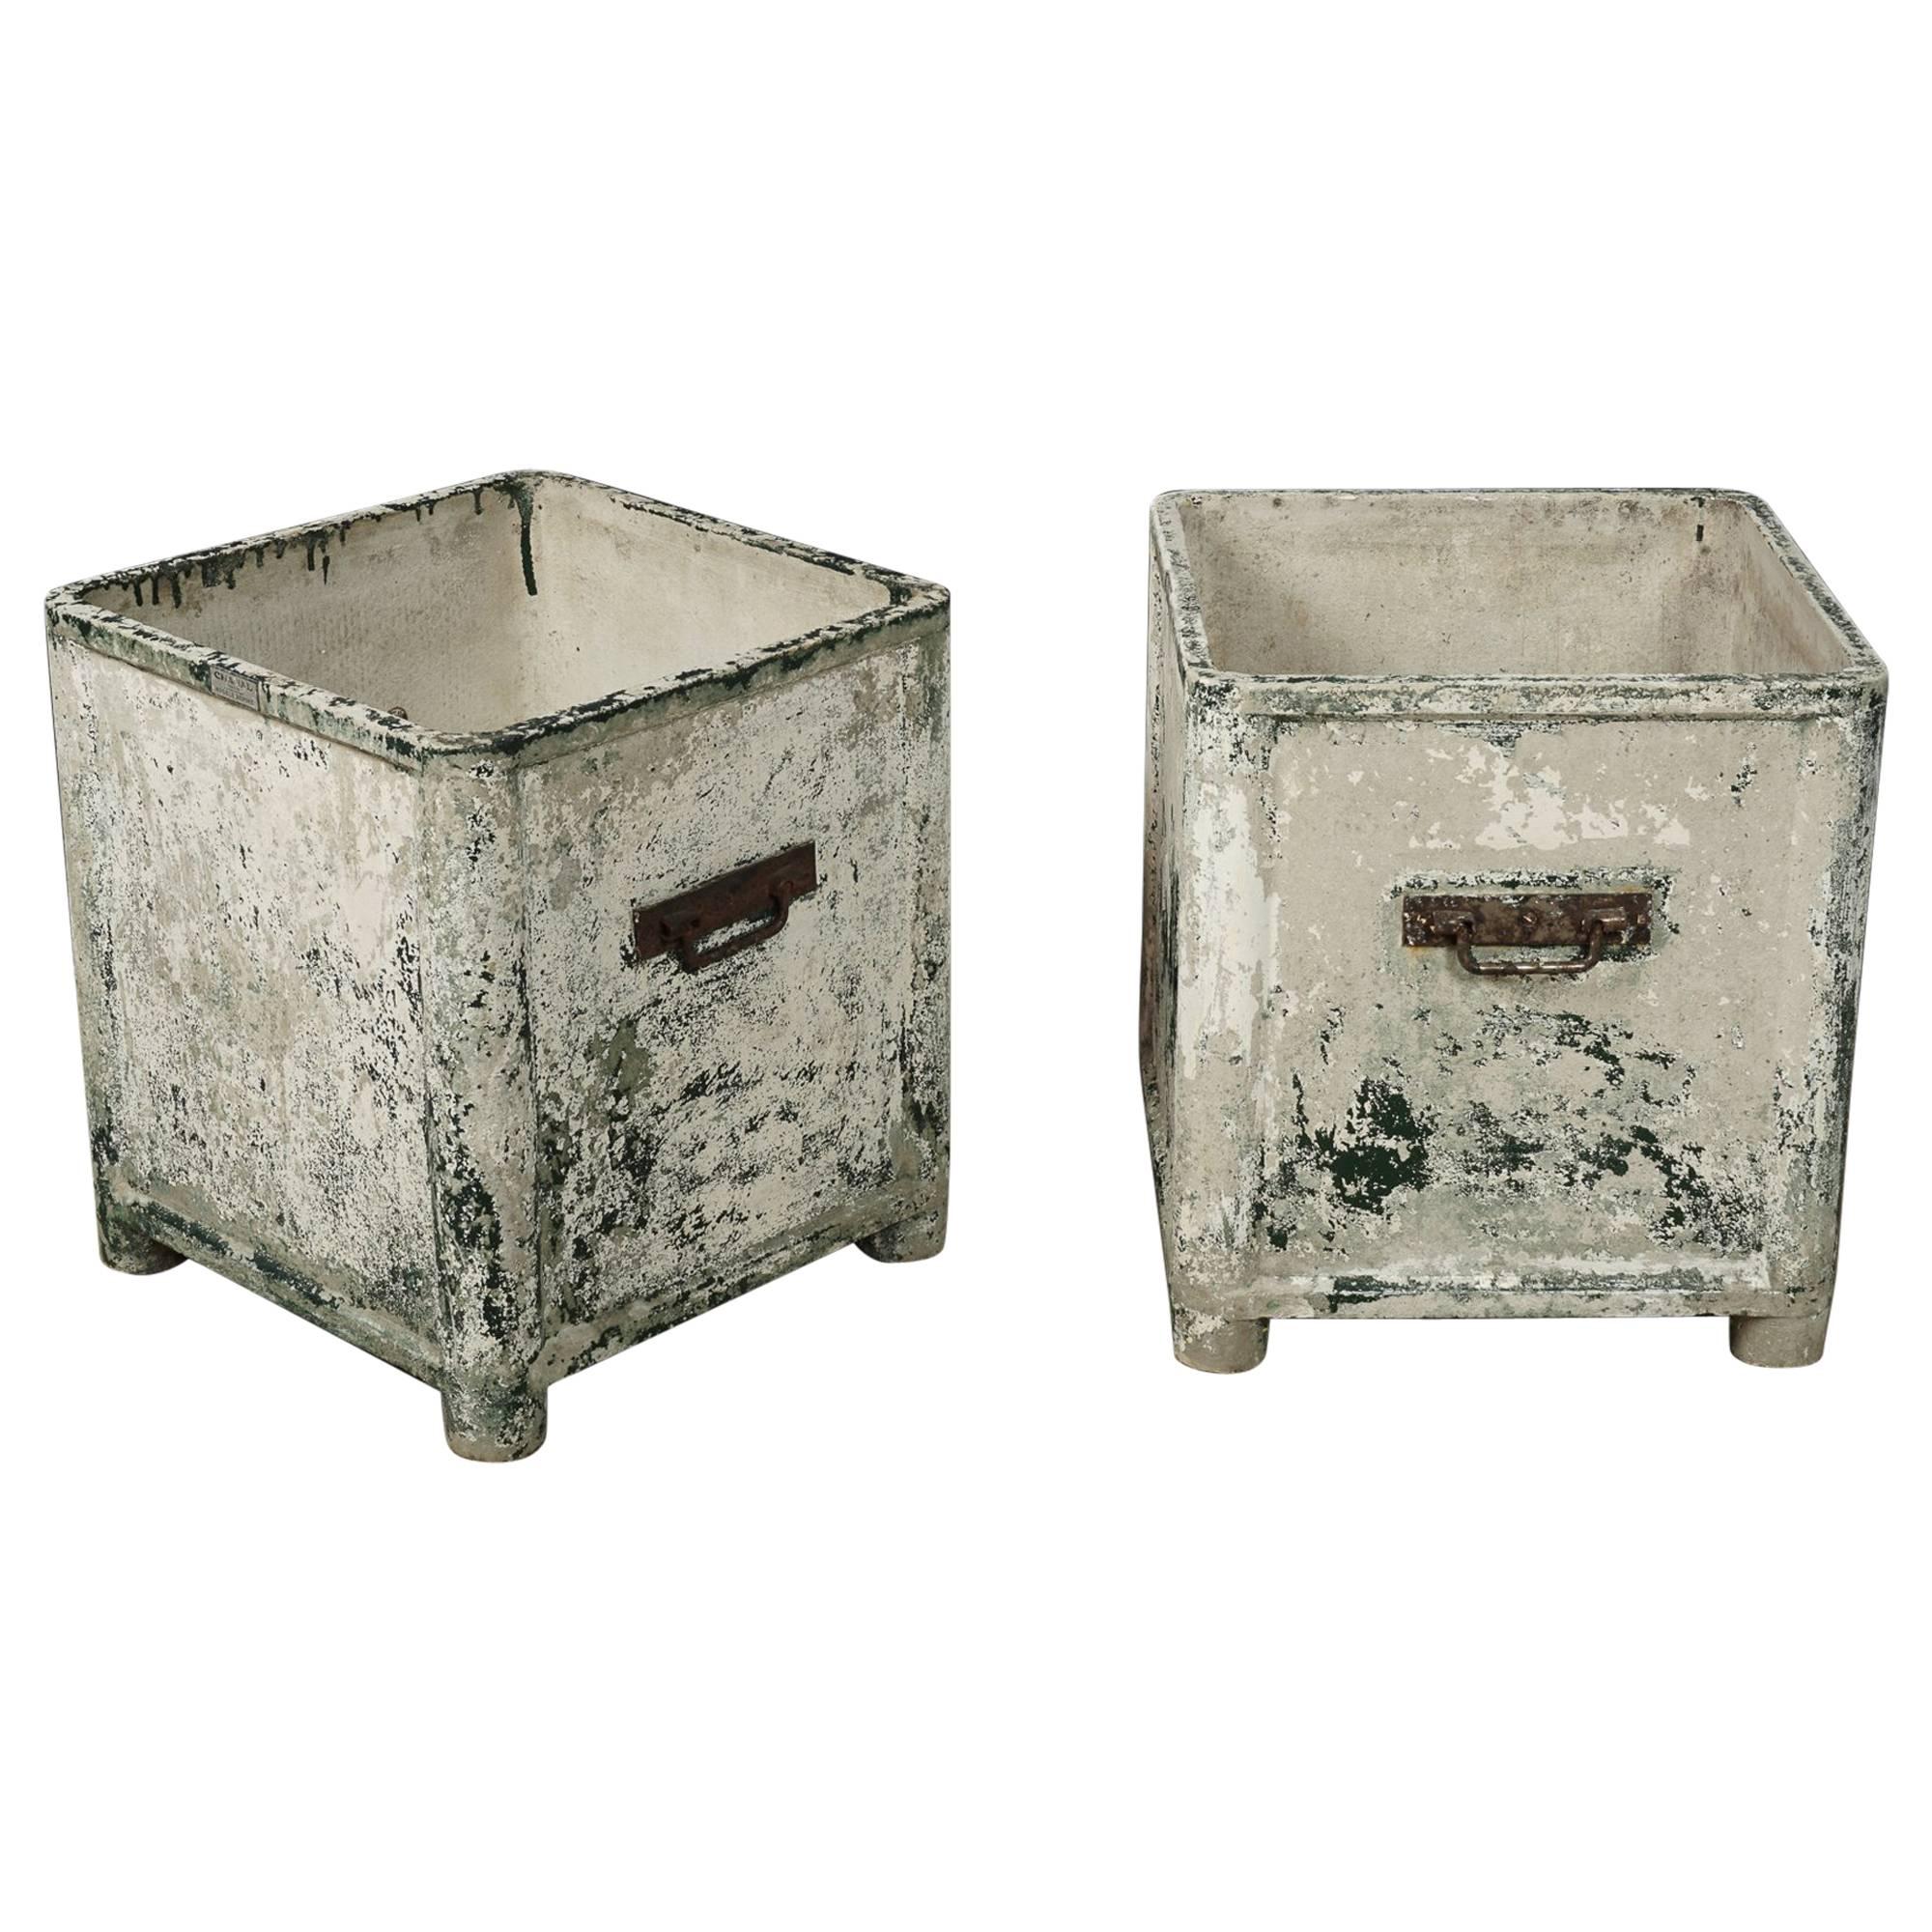 Pair of Plaster and Fiberglass Planters Manufactured by Chanal, Paris